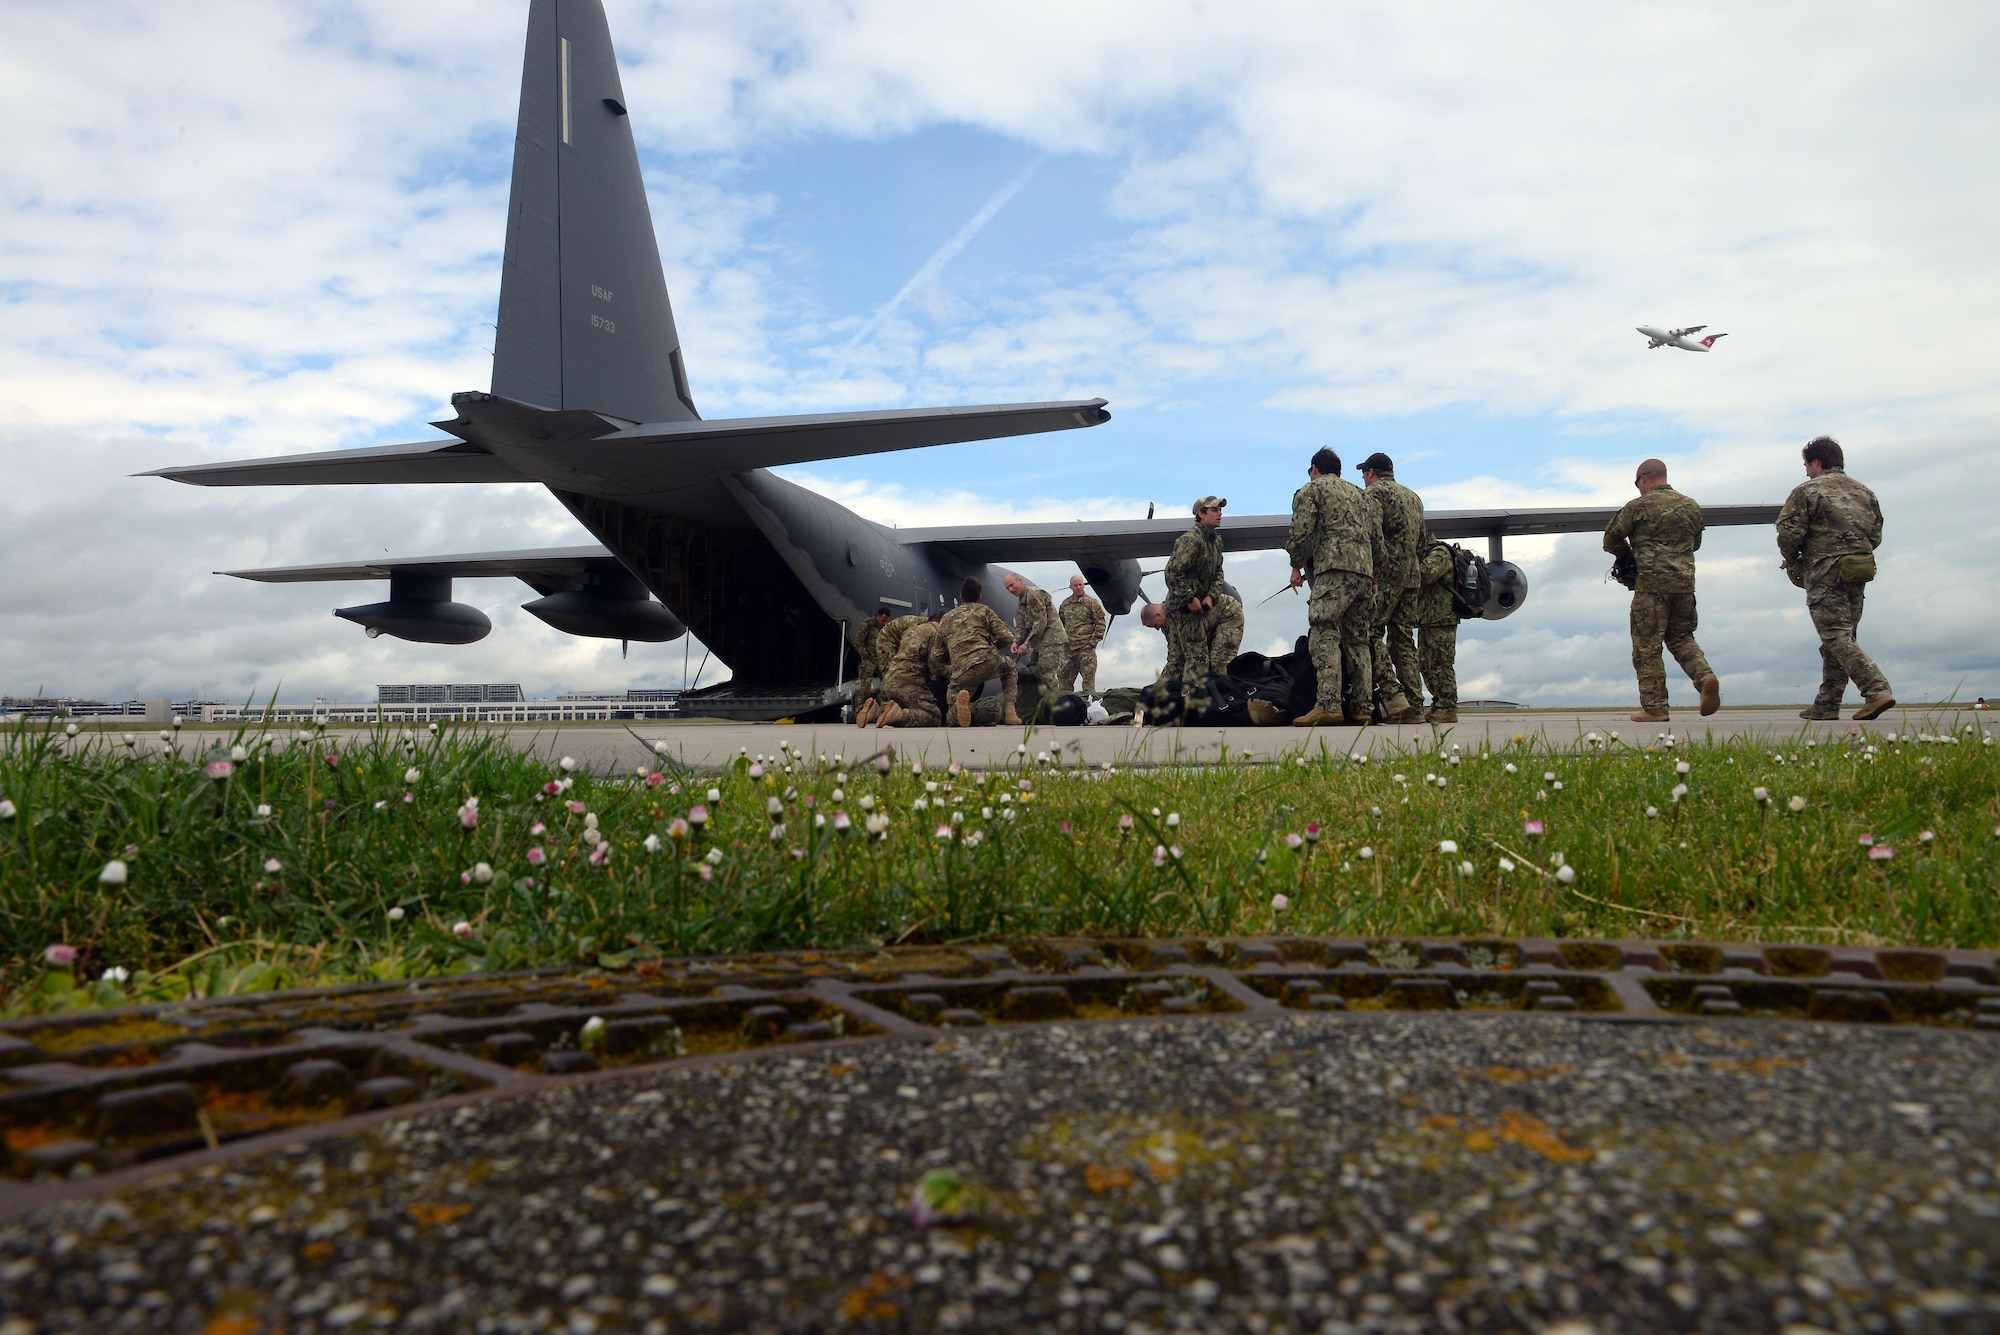 Operators from U.S. Special Operations Command -- Europe prepare prior their gear before a high-altitude, low-opening jump May 30, 2015, over Mont Saint-Michele, France. The paratroopers jumped from an MC-130J Commando II assigned to the 67th Special Operations Squadron from as high as 13,000 feet to commemorate the 71st anniversary of the liberation of France during World War II. (U.S. Air Force photo by Staff Sgt. Micaiah Anthony)